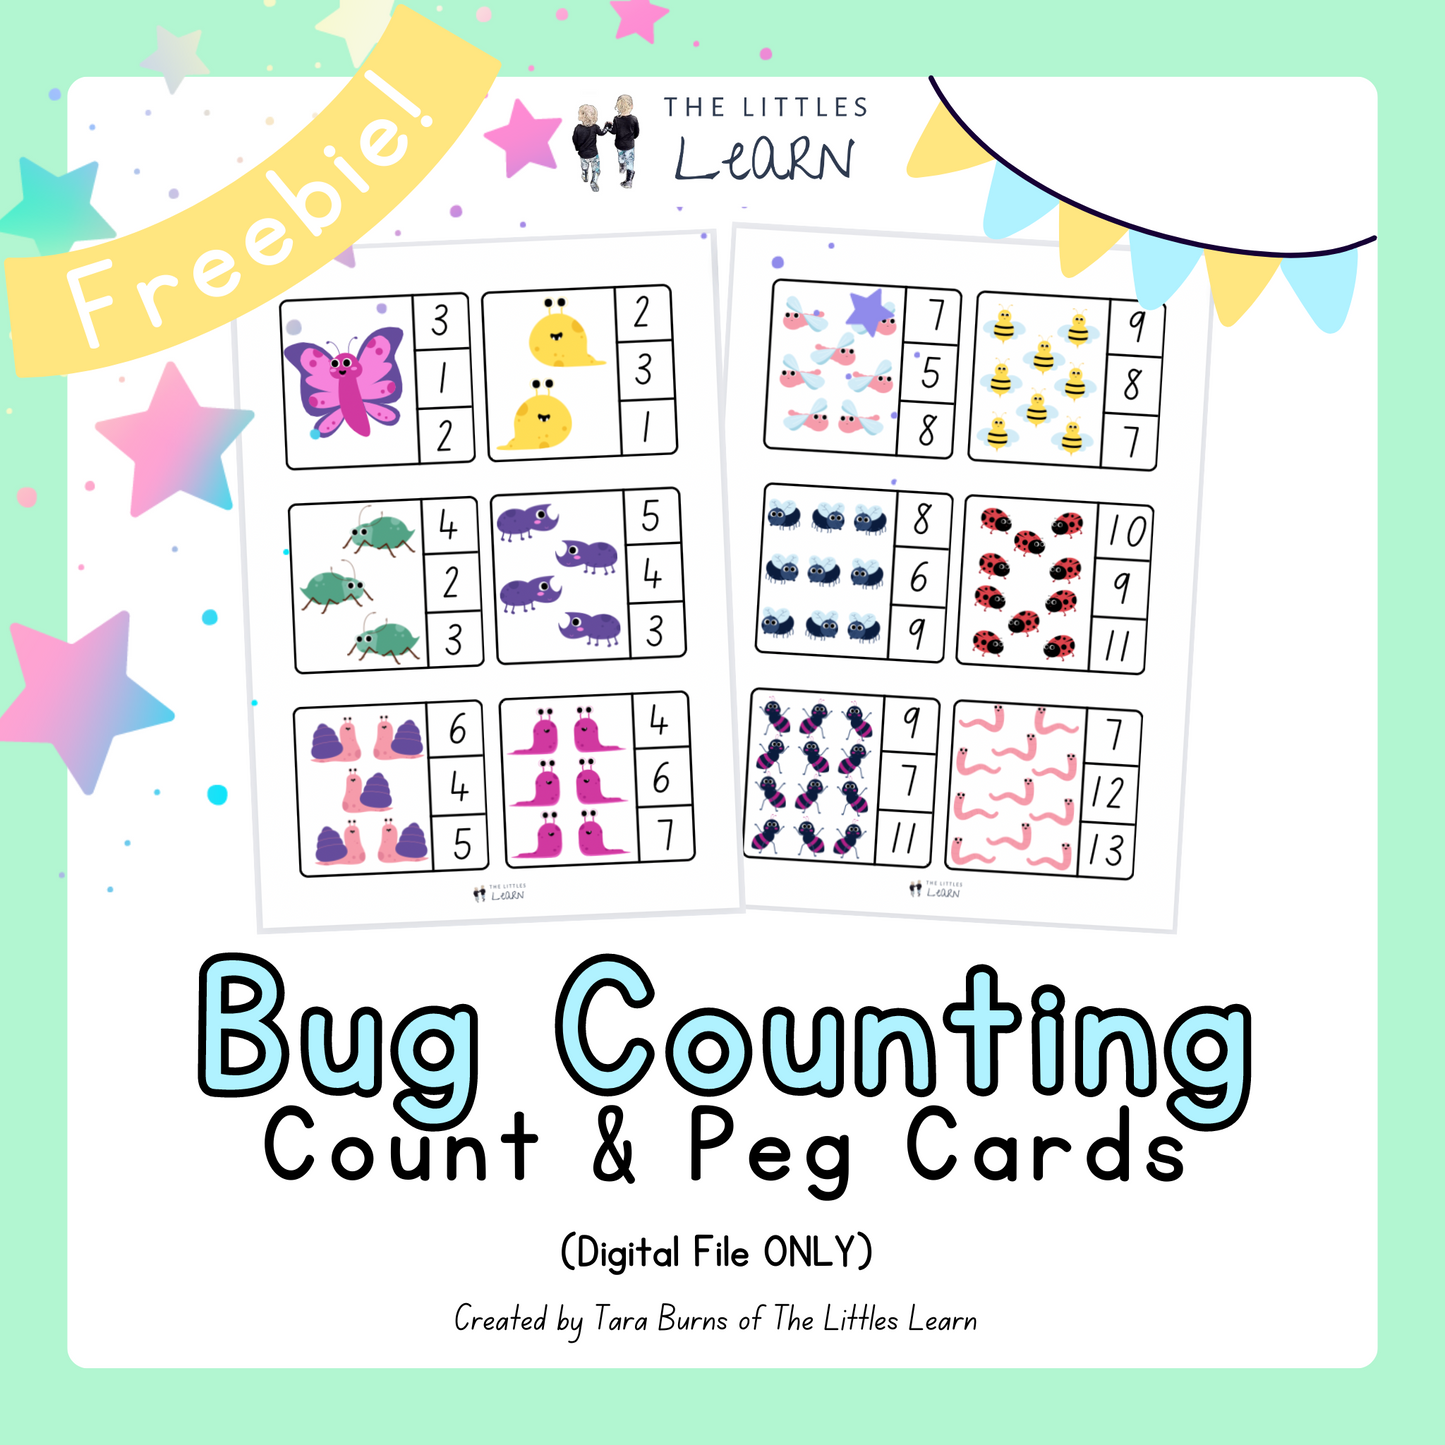 Bug Counting - Count and Peg Cards